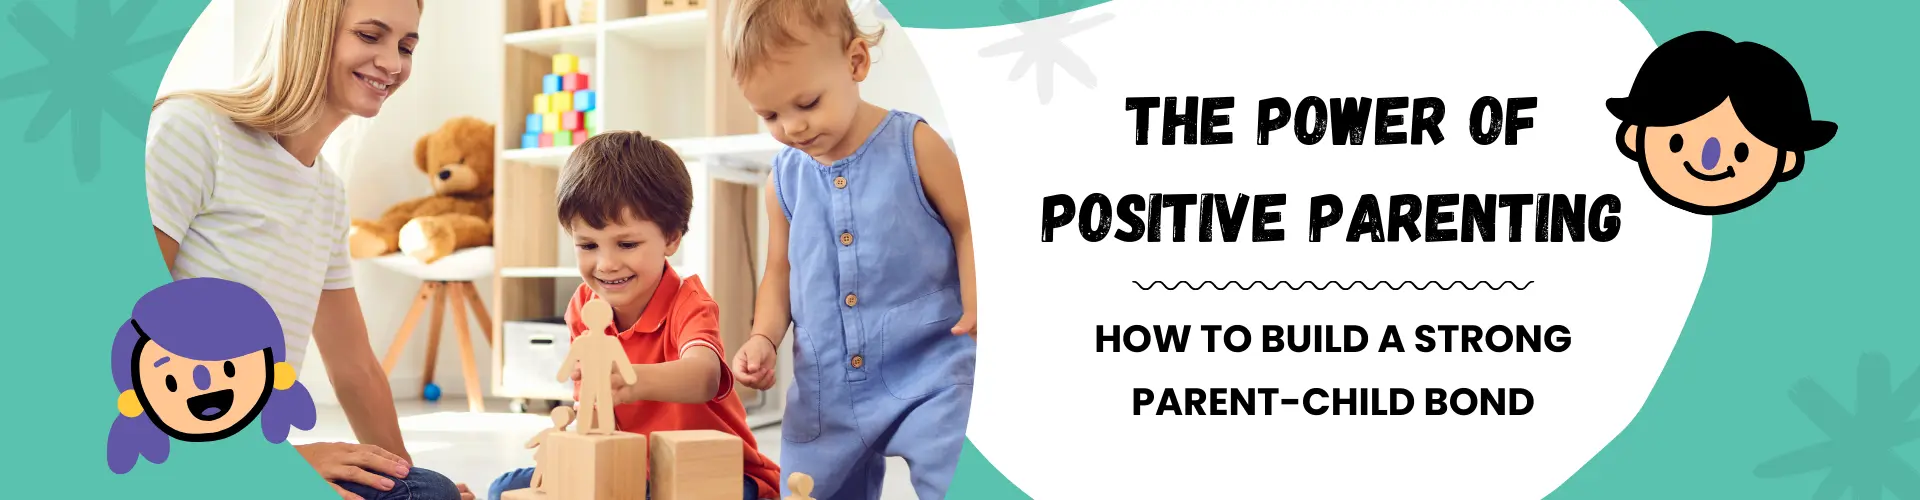 The Power of Positive Parenting: How to Build a Strong Parent-Child Bond